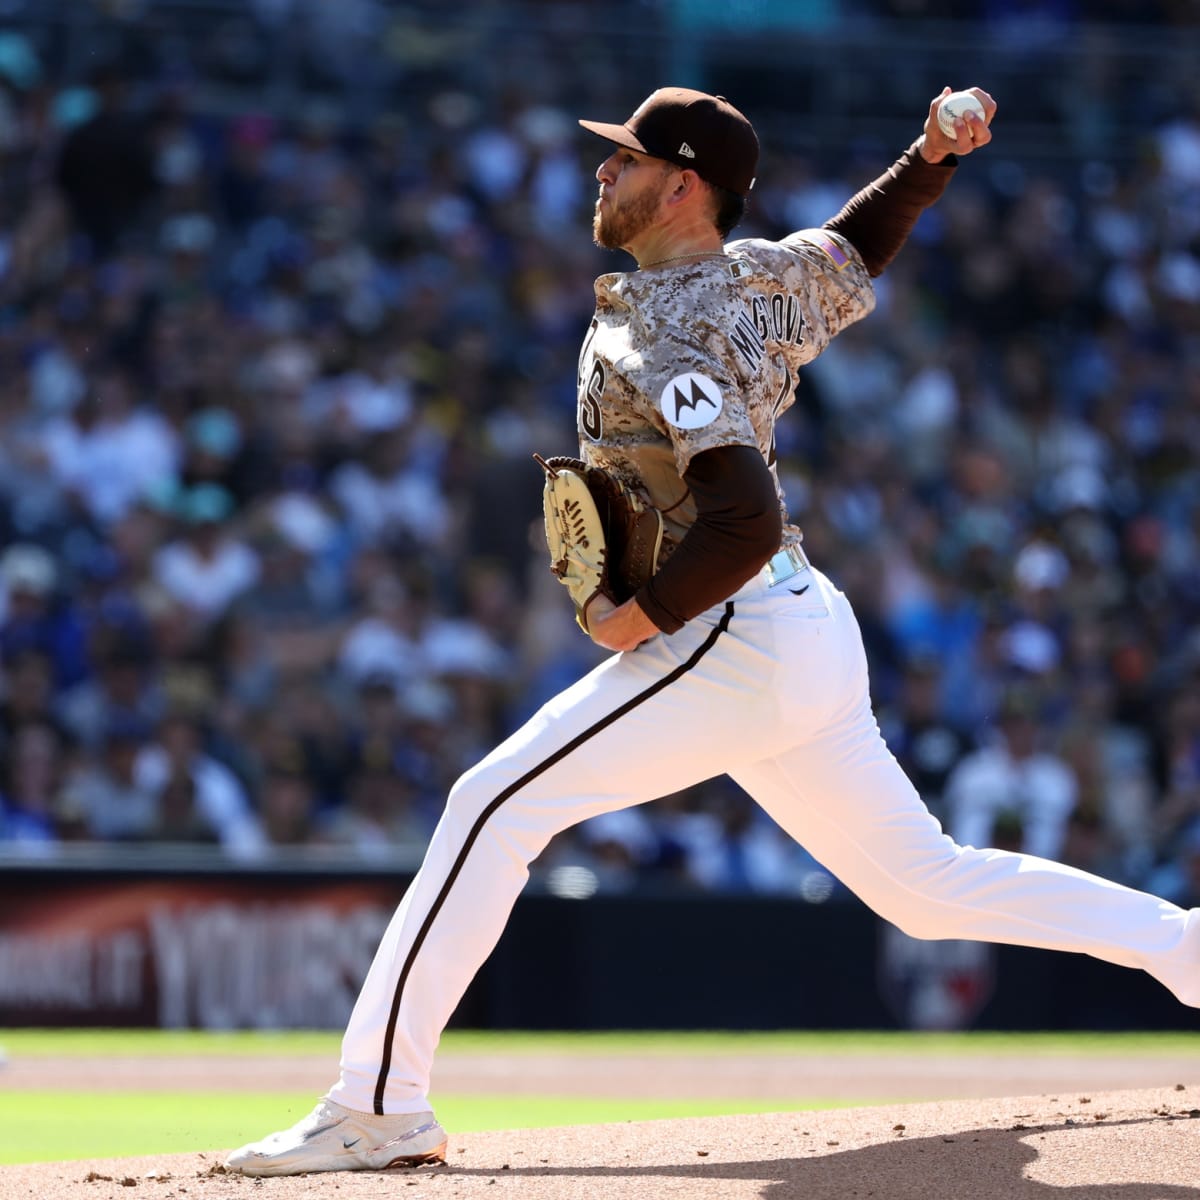 Padres Ace Joe Musgrove Had 4 Teeth Removed This Week - Sports Illustrated  Inside The Padres News, Analysis and More